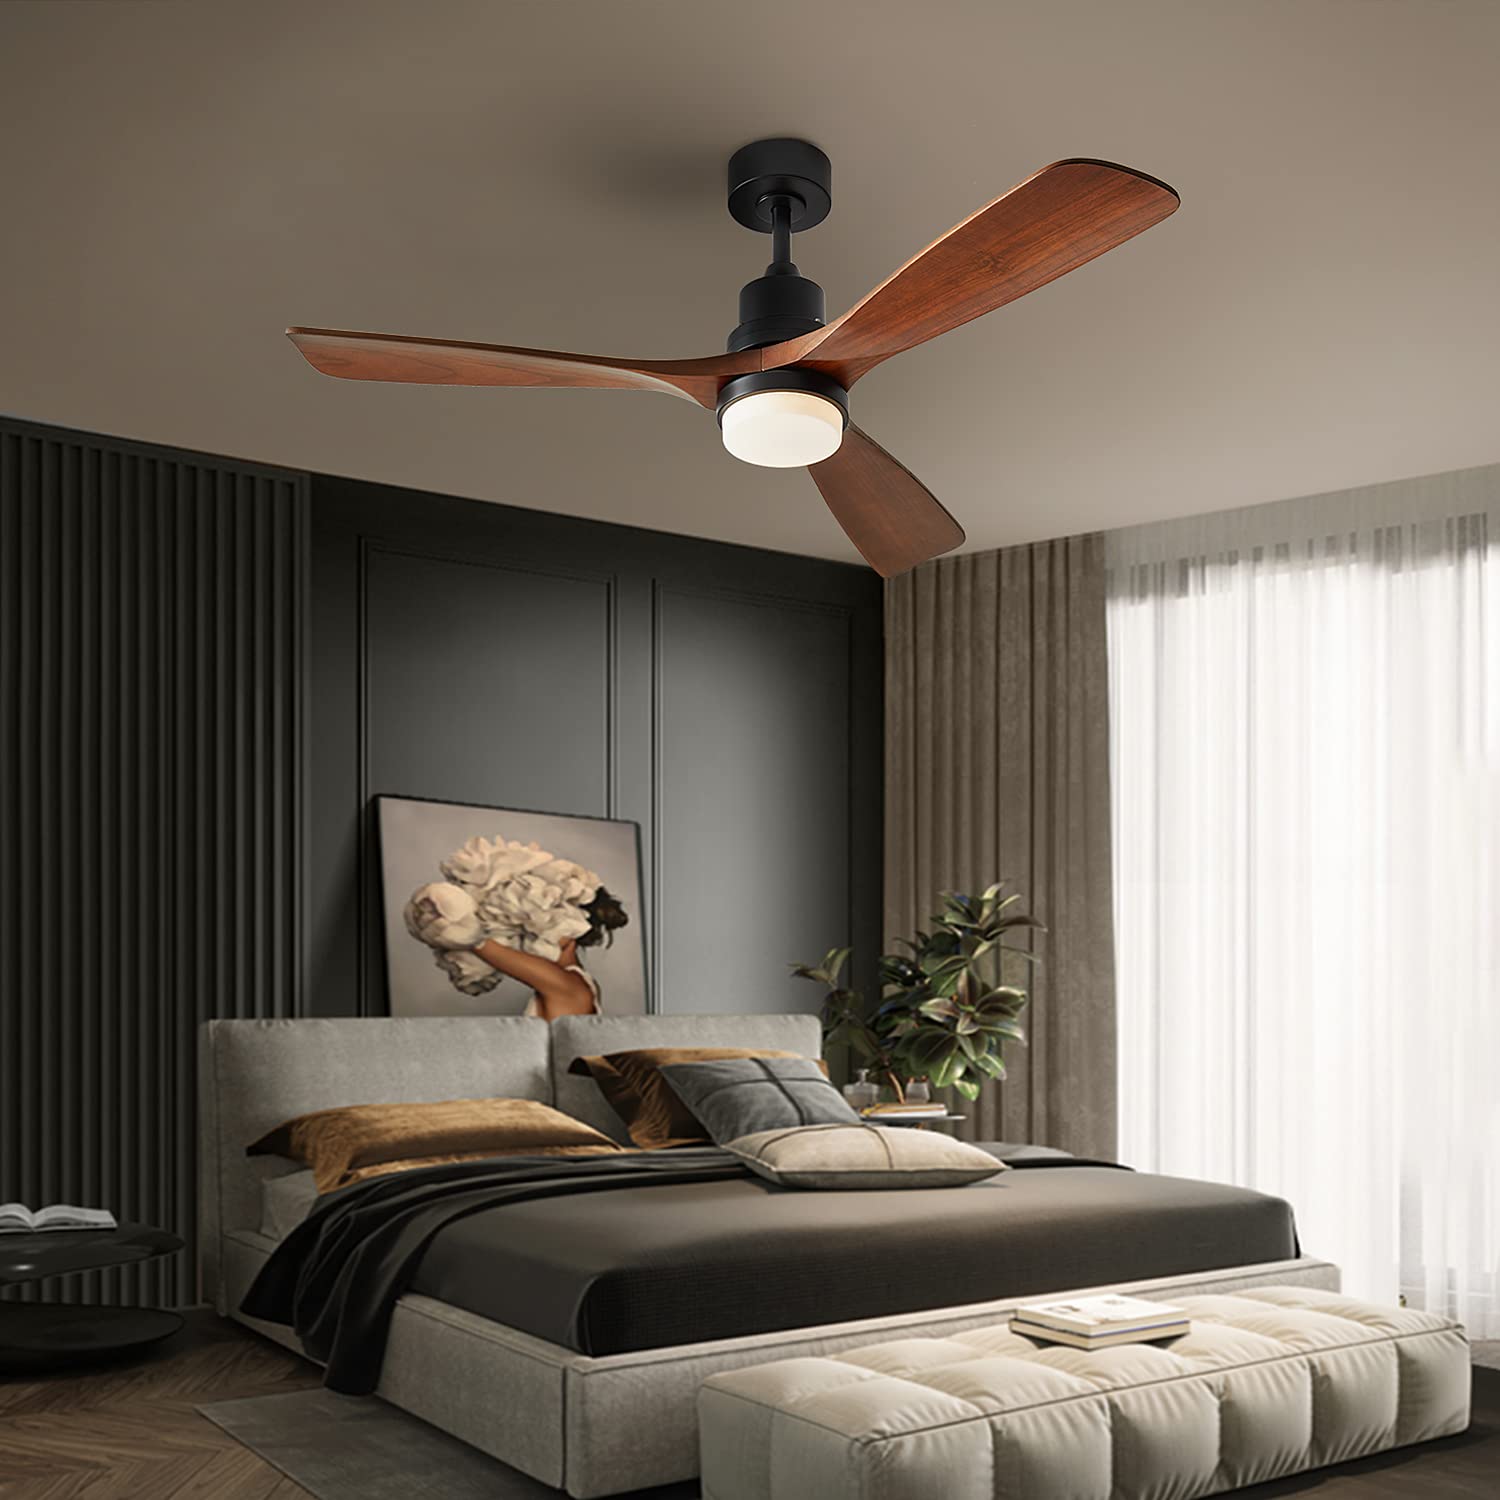 Chriari Ceiling Fans with Lights, 60" Wood Ceiling Fan